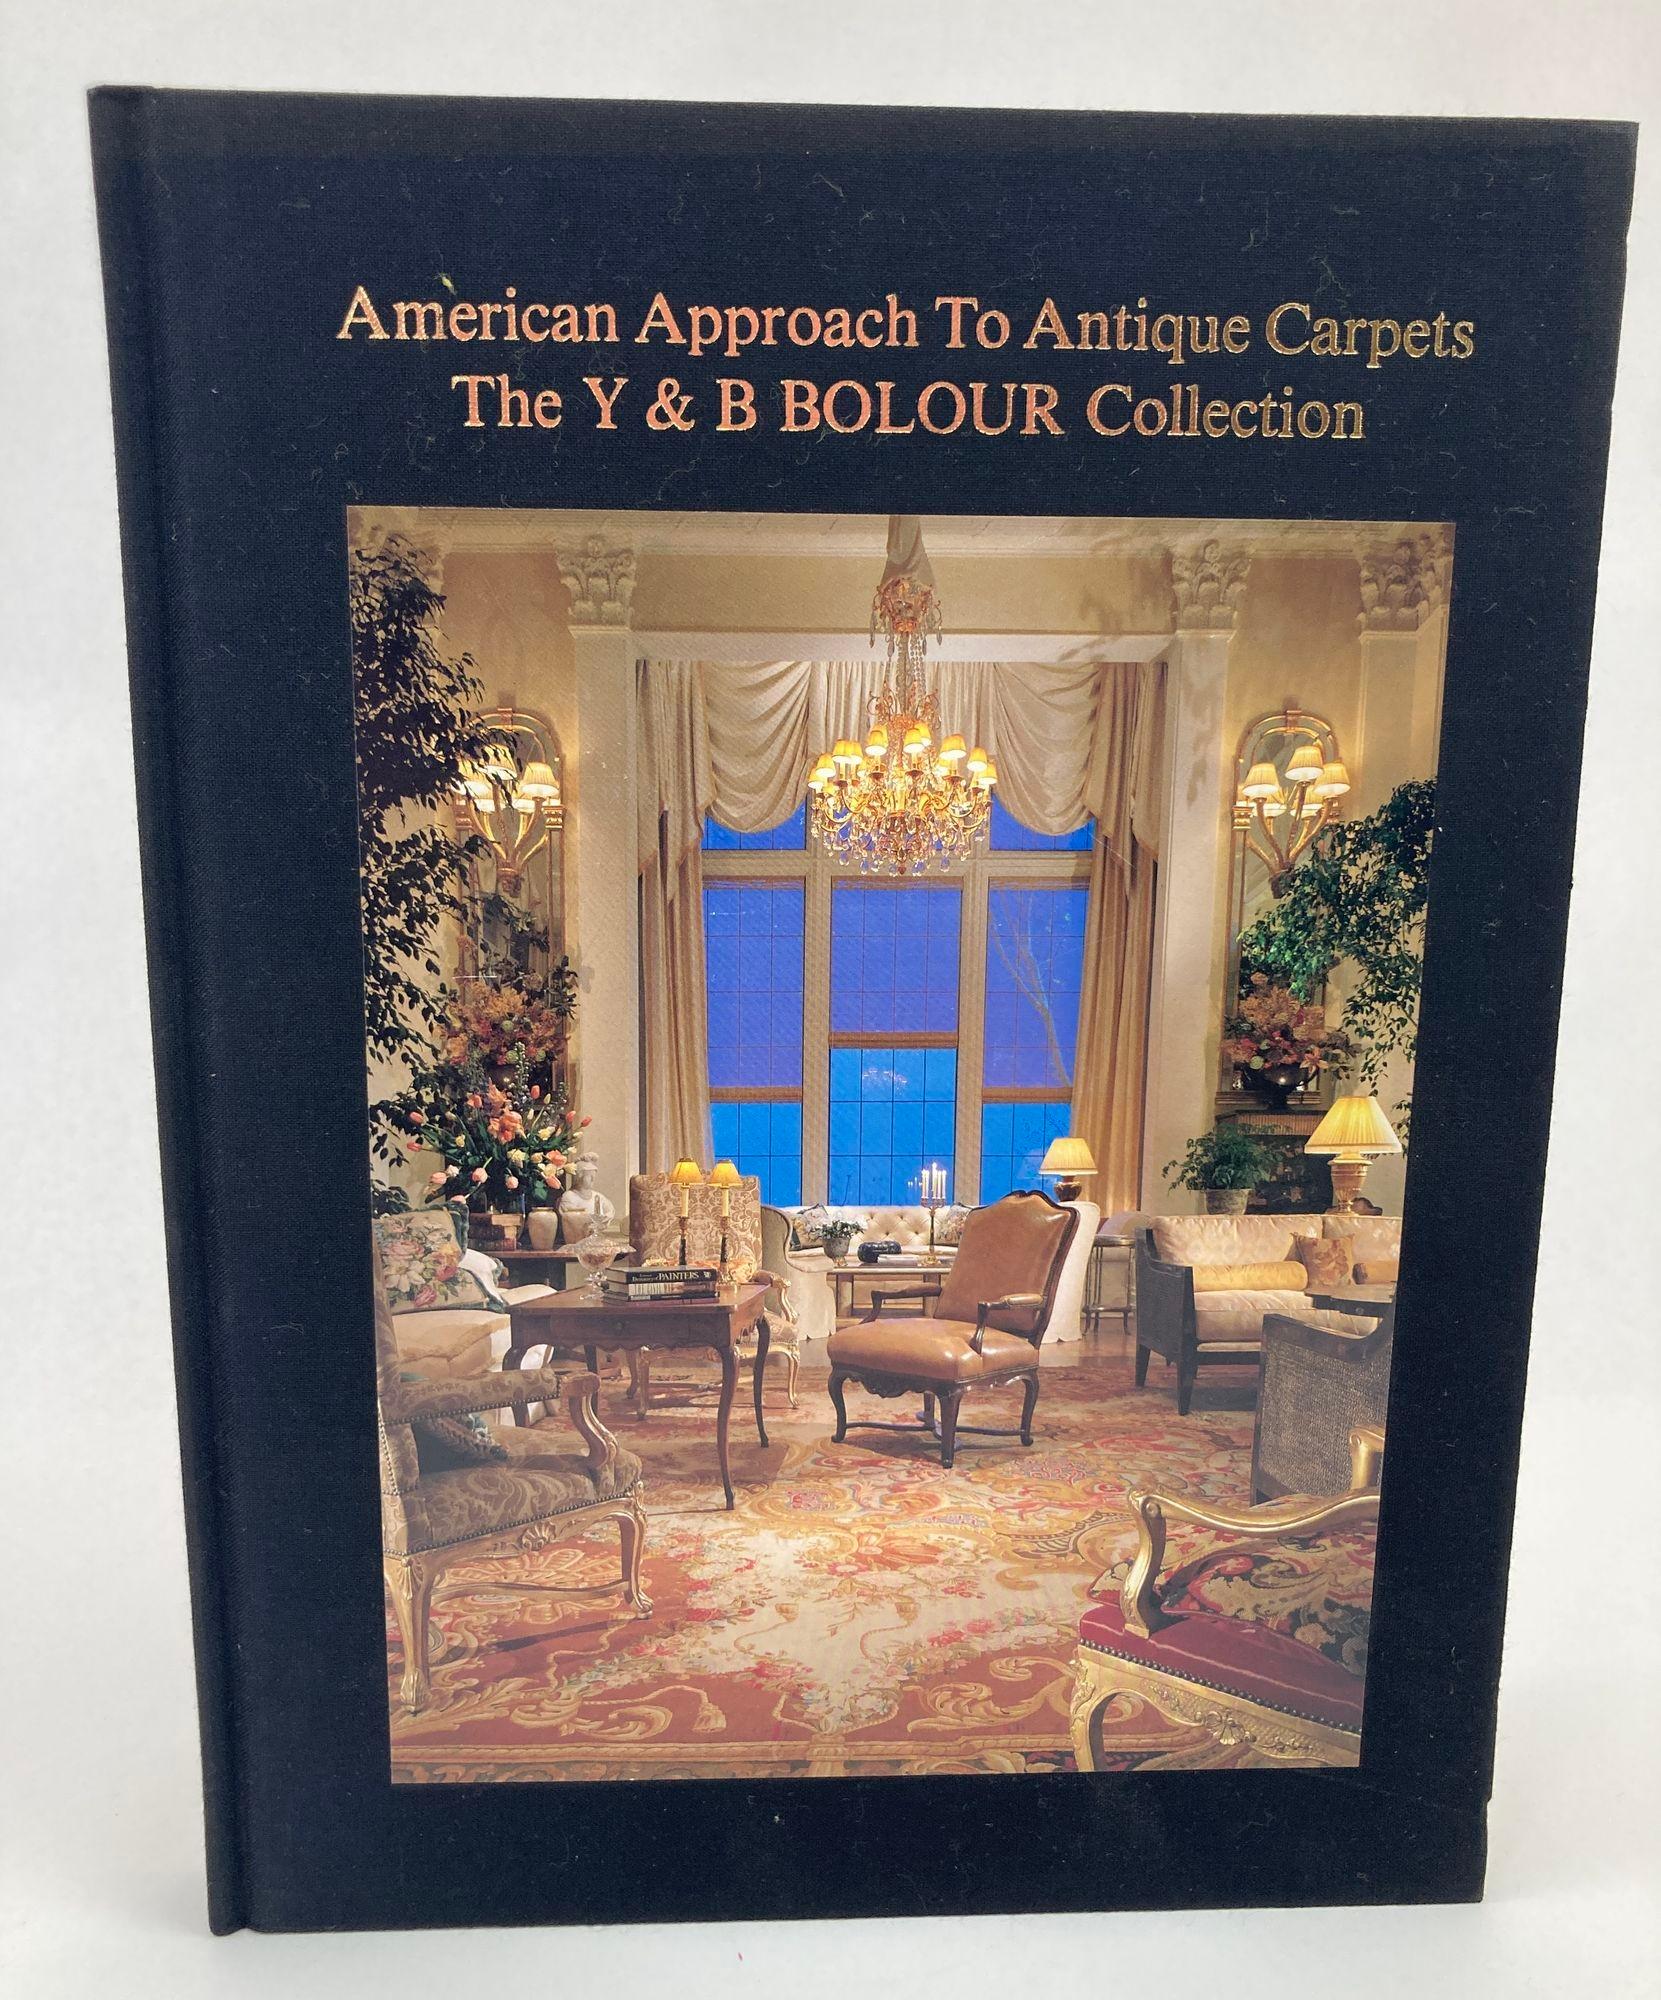 American Approach to Antique Carpets the Y & B Bolour Collection Los Angeles California USA.
First Edition; 1992.
Bright, clean copy.
